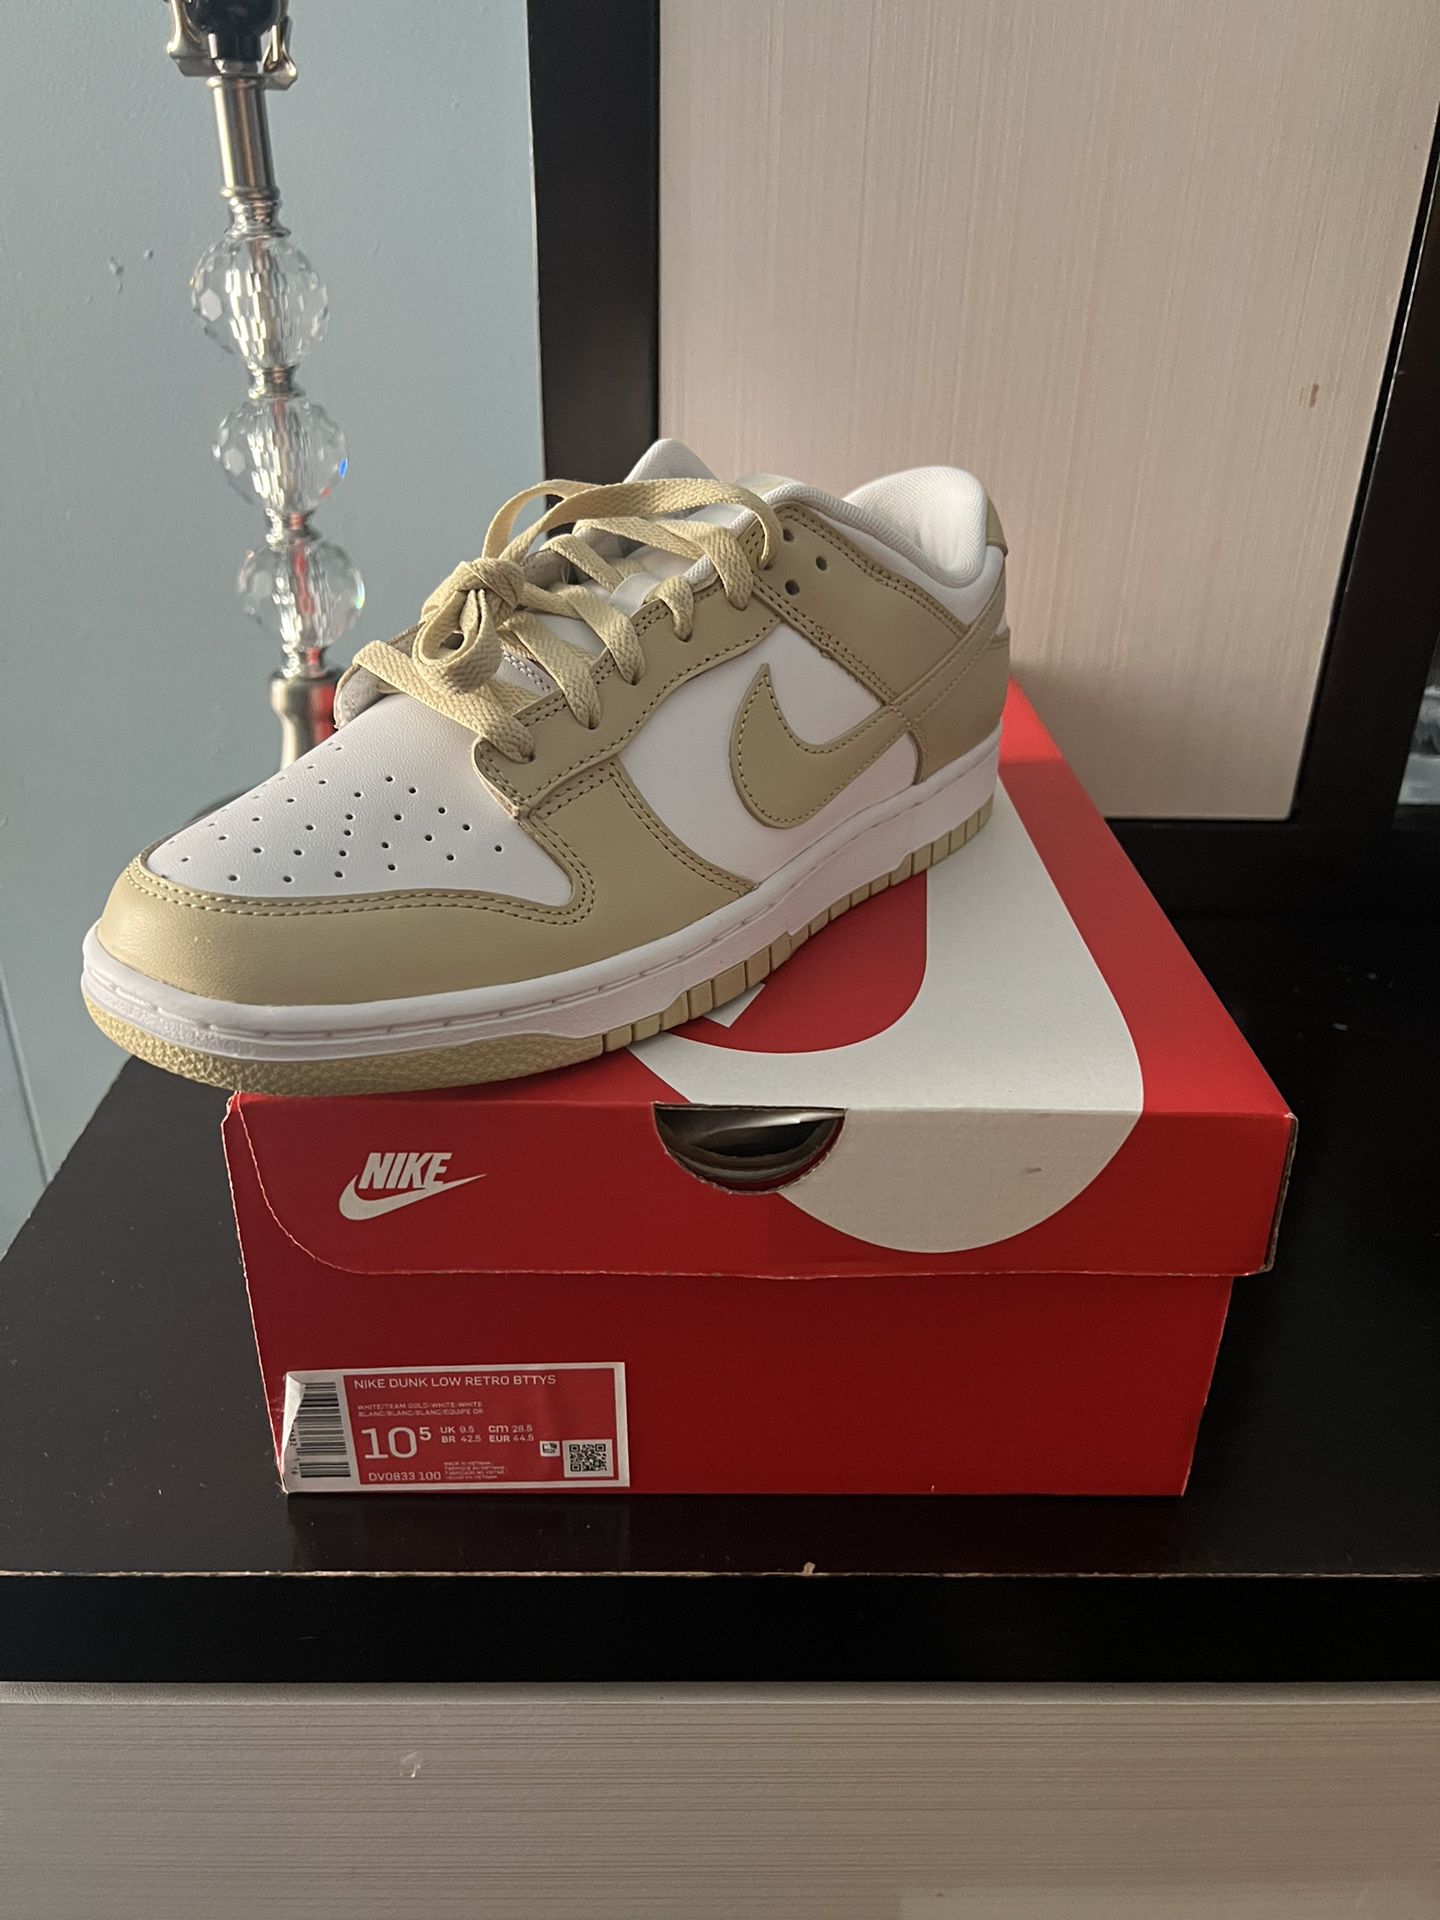 Nike Dunk Low “Team Gold” for Sale in Bellflower, CA - OfferUp